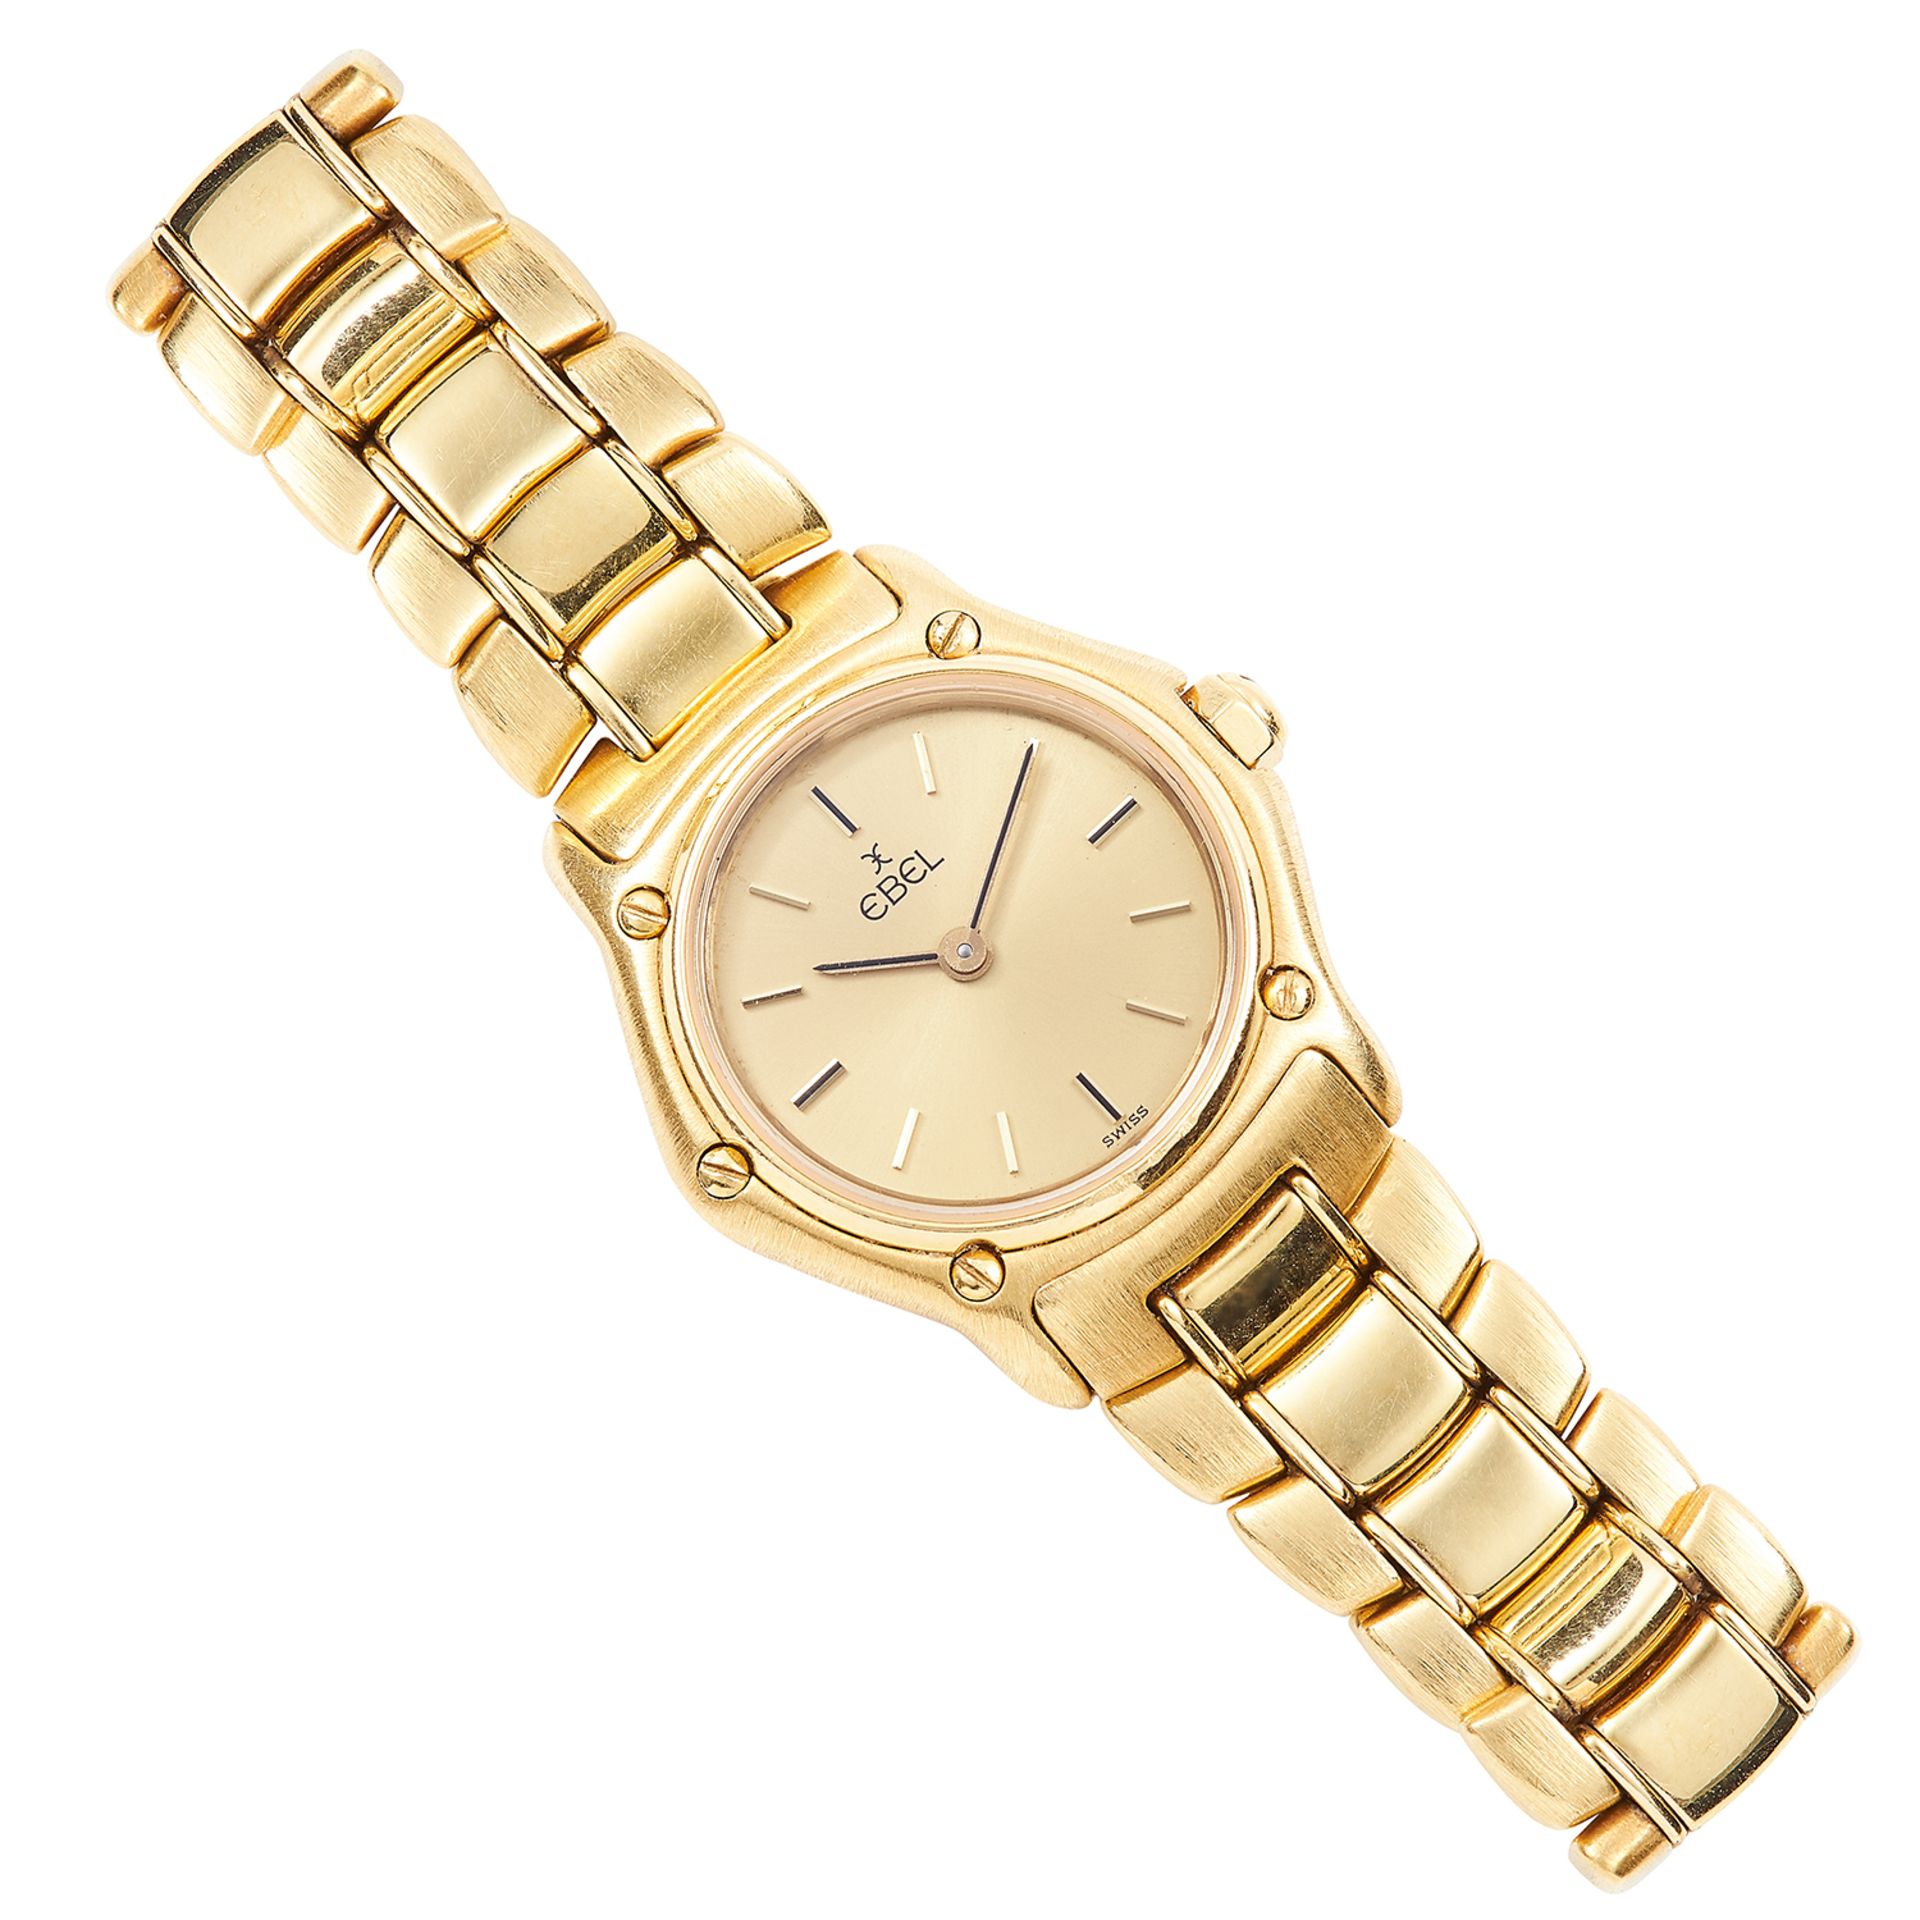 LADIES EBEL WAVE WRISTWATCH in 18ct yellow gold, 23mm case size, yellow gold strap, stamped 750,